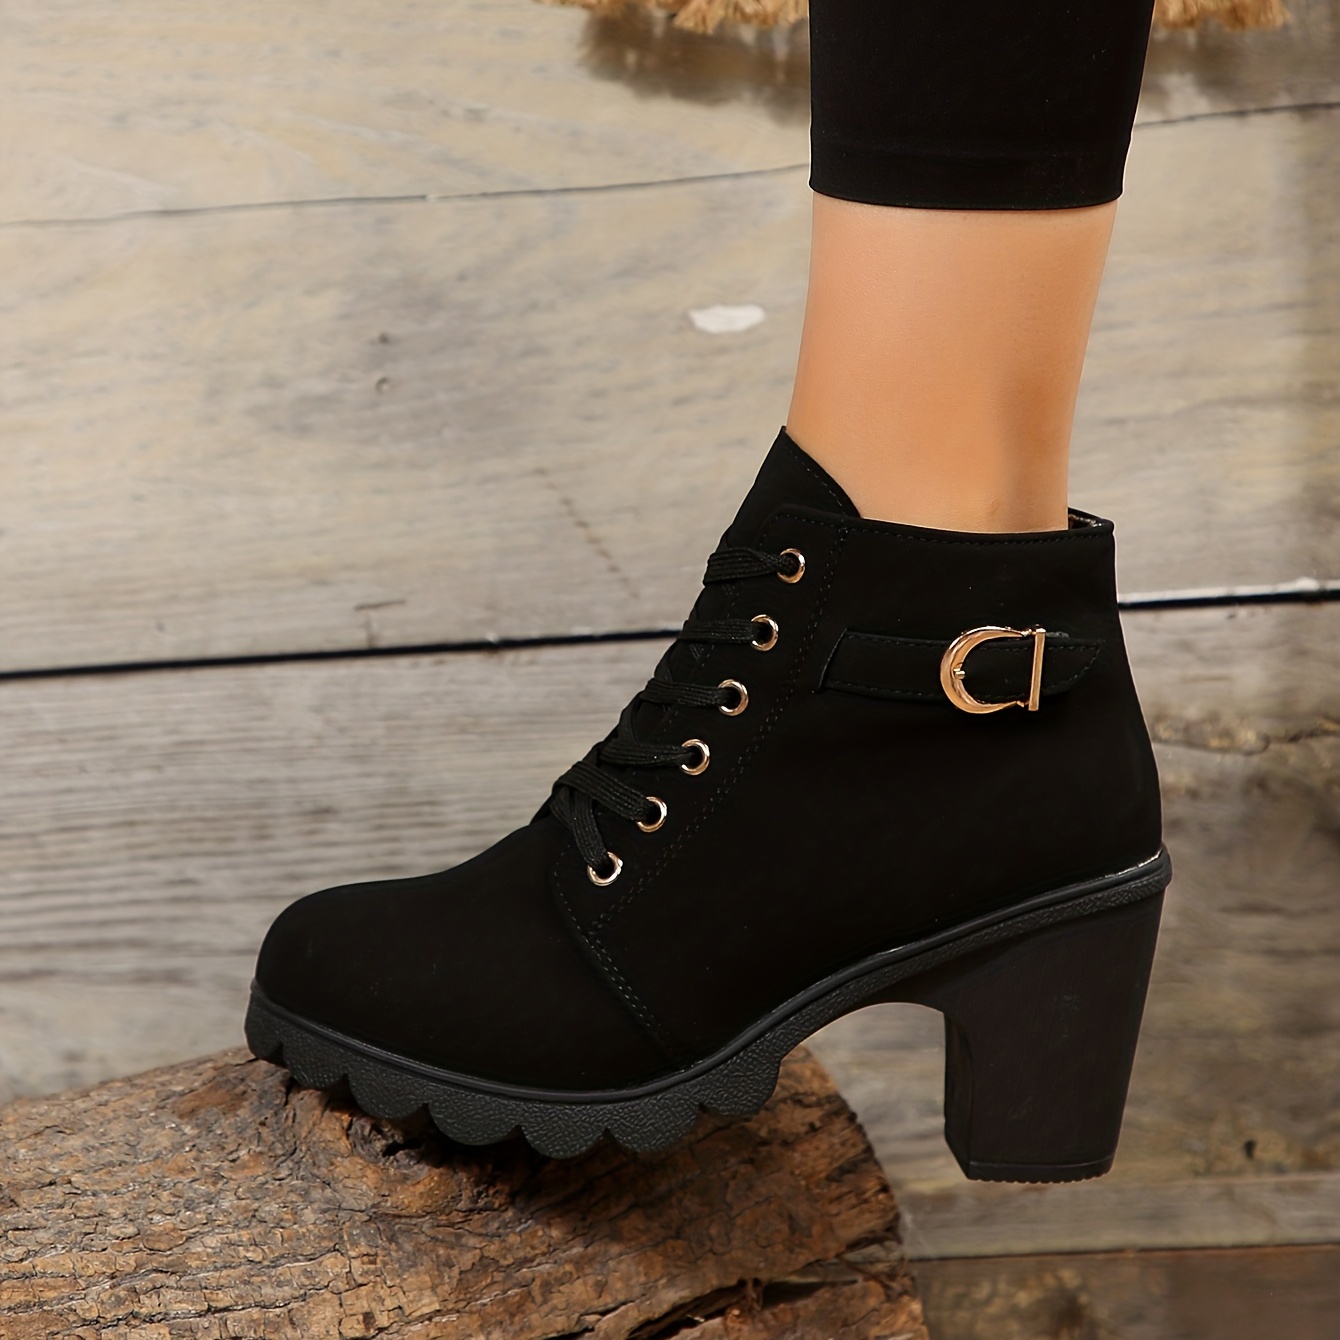 Women's Solid Color Block Heeled Boots, Elegant Lace Up Short Boots,  Stylish Side Zipper Ankle Boots